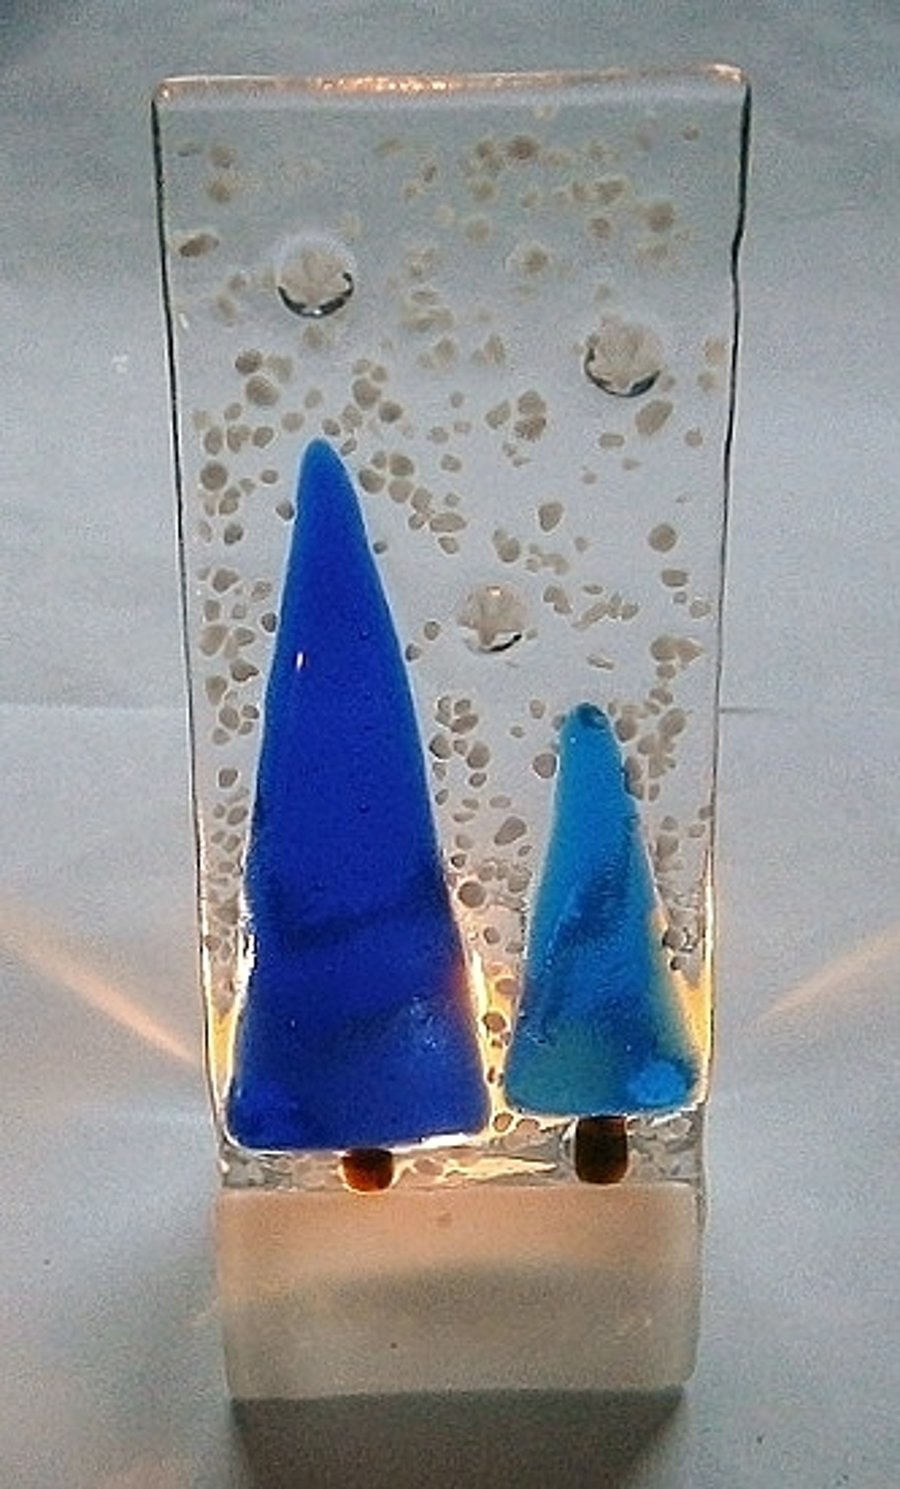 Festive fused glass snowy blue Christmas tree candle holder or tealight holder